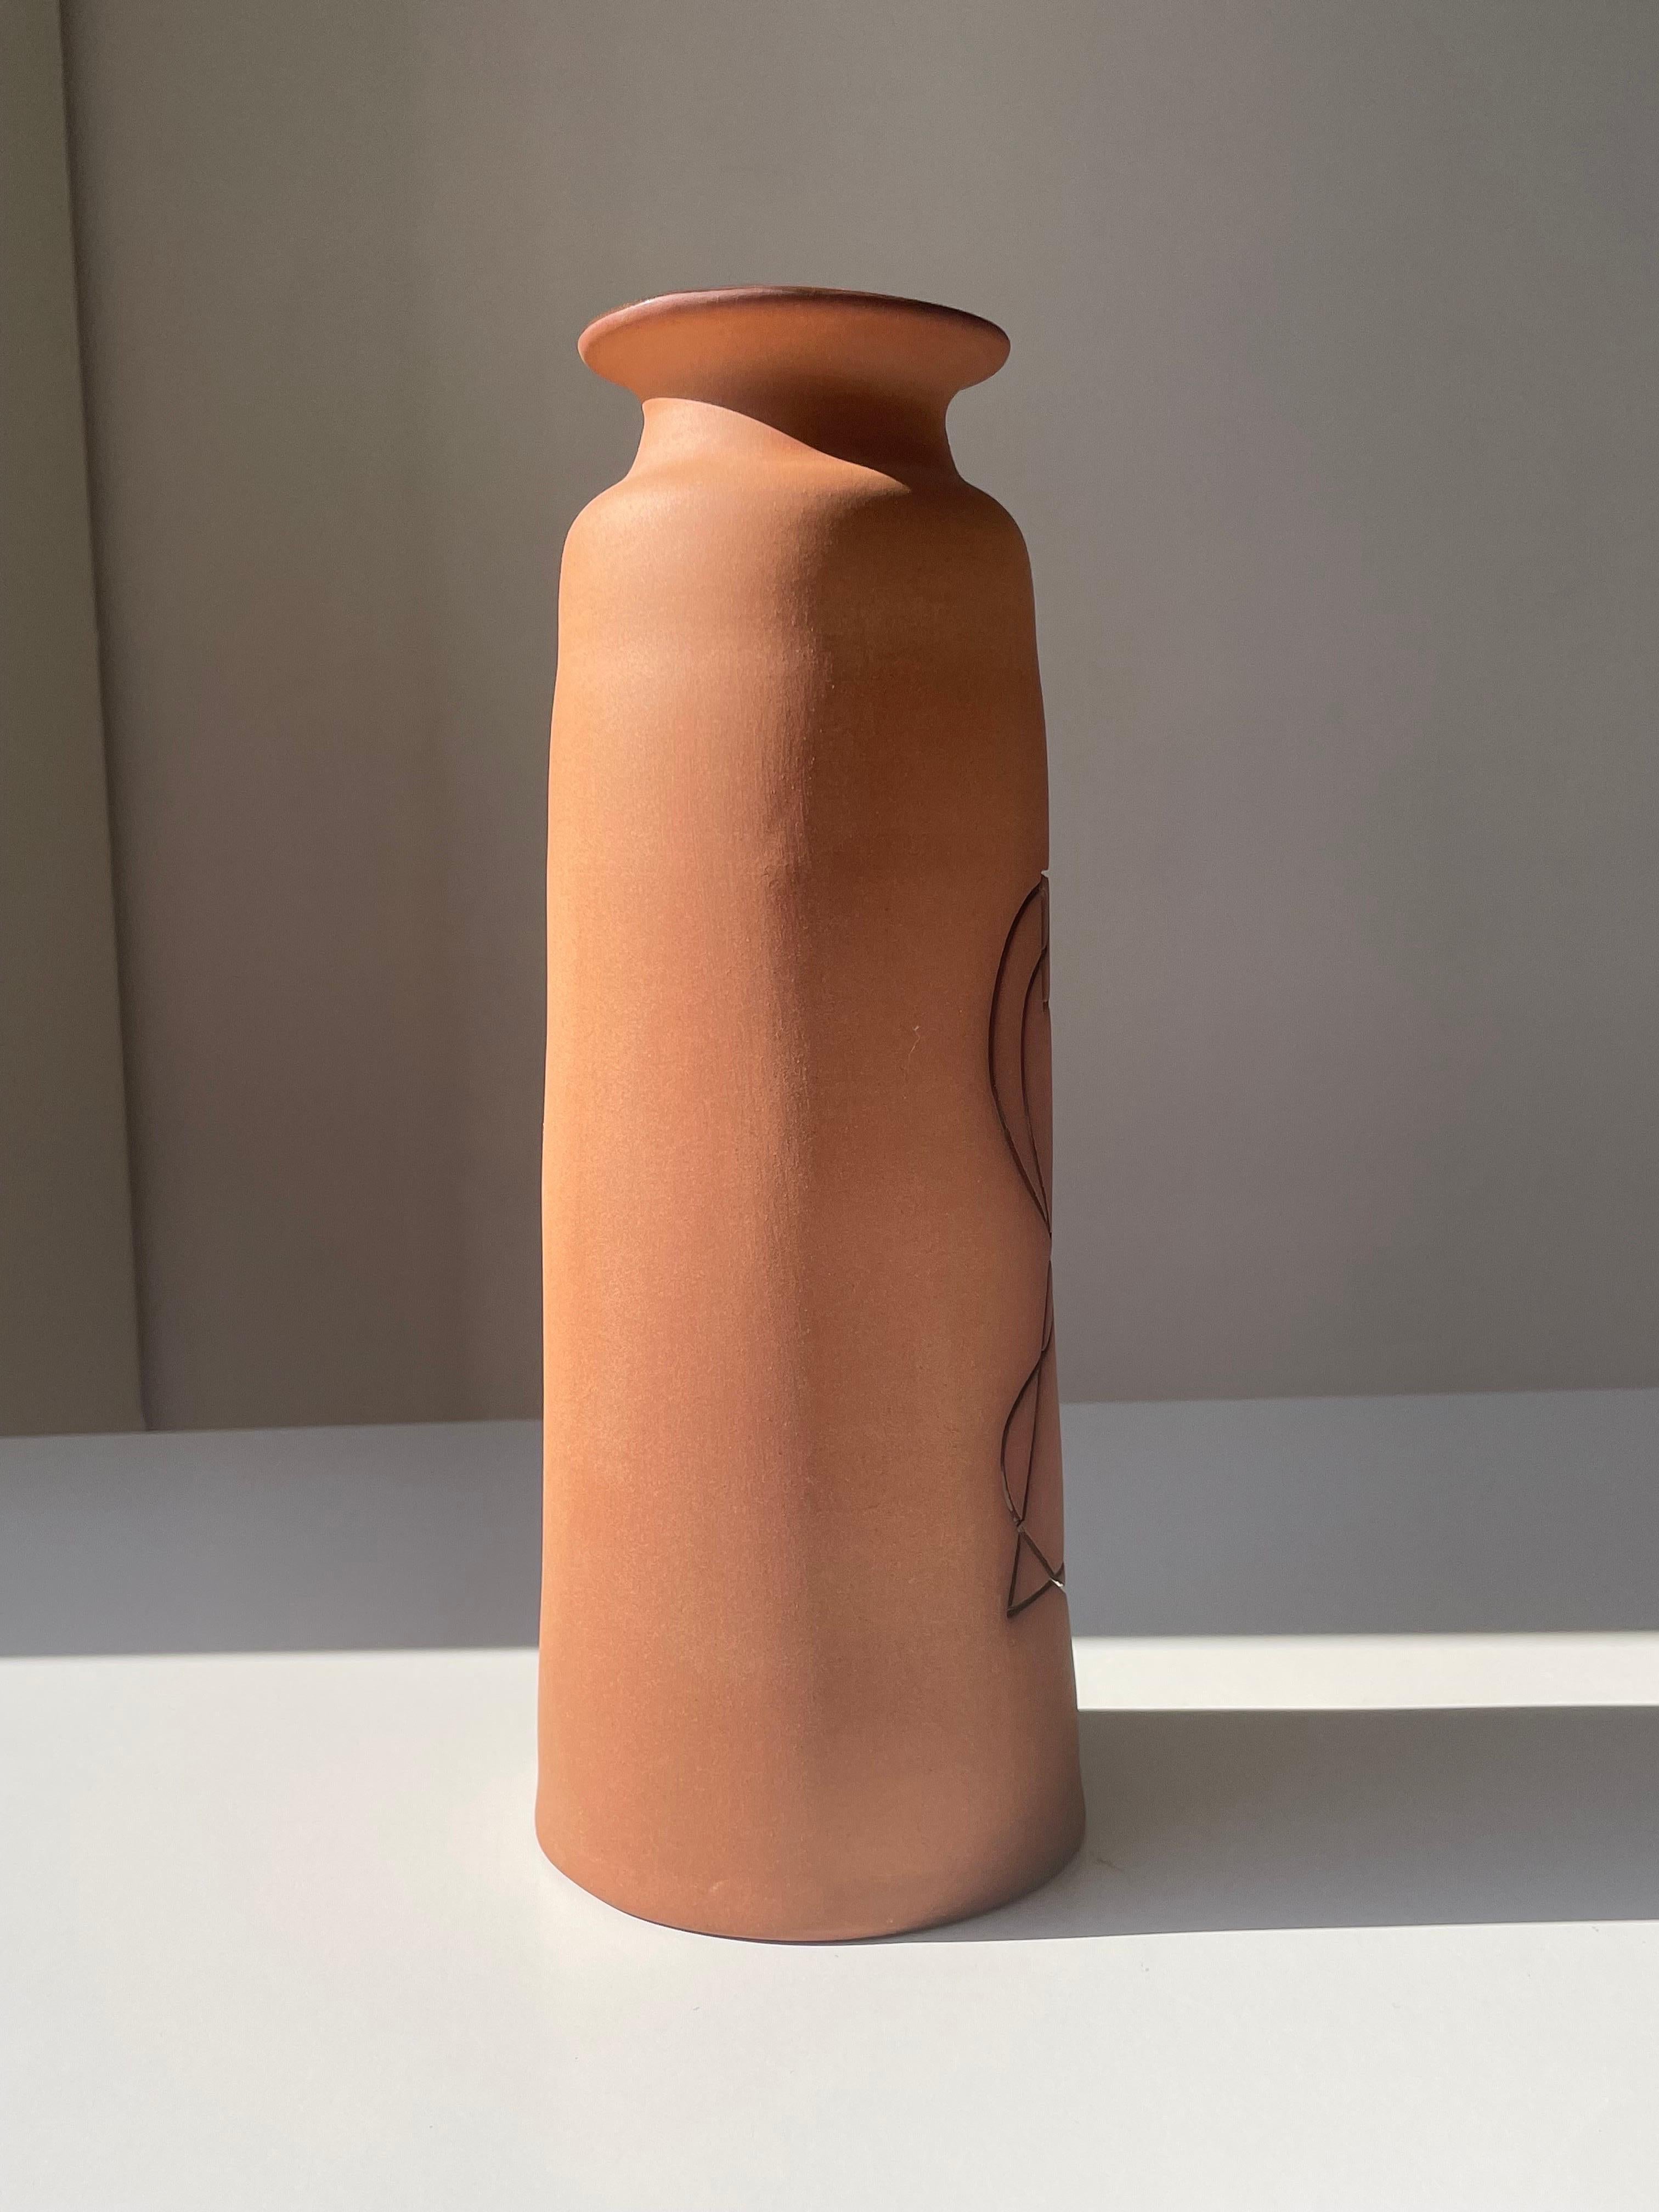 Cypriot Tall Mediterranean Contemporary Ceramic Vase, Cyprus For Sale